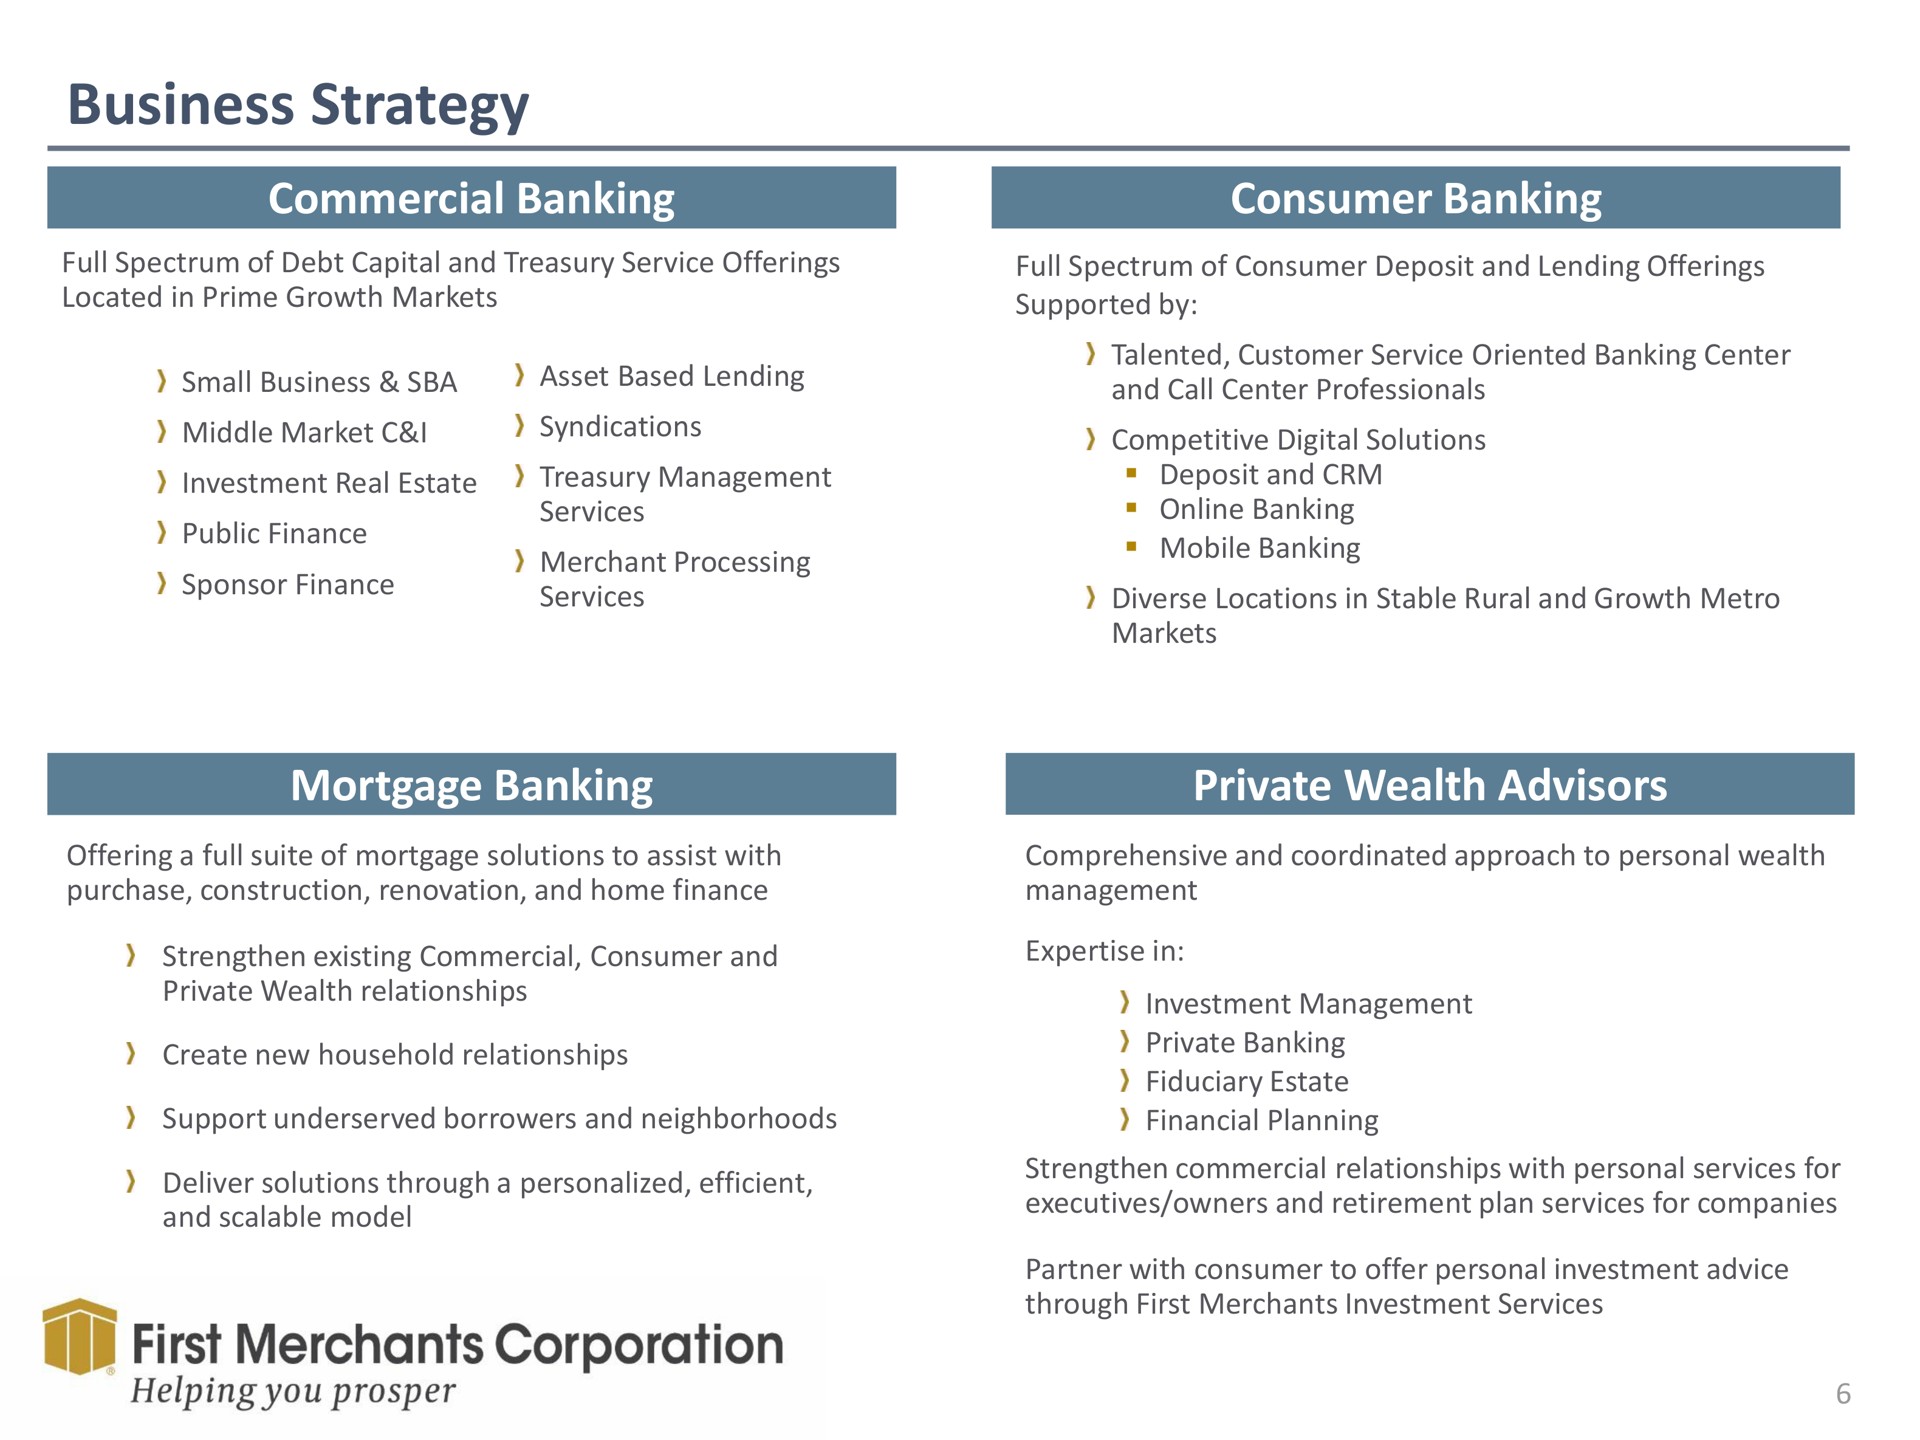 business strategy commercial banking consumer banking mortgage banking private wealth advisors merchant processing mobile first merchants corporation helping you prosper | First Merchants